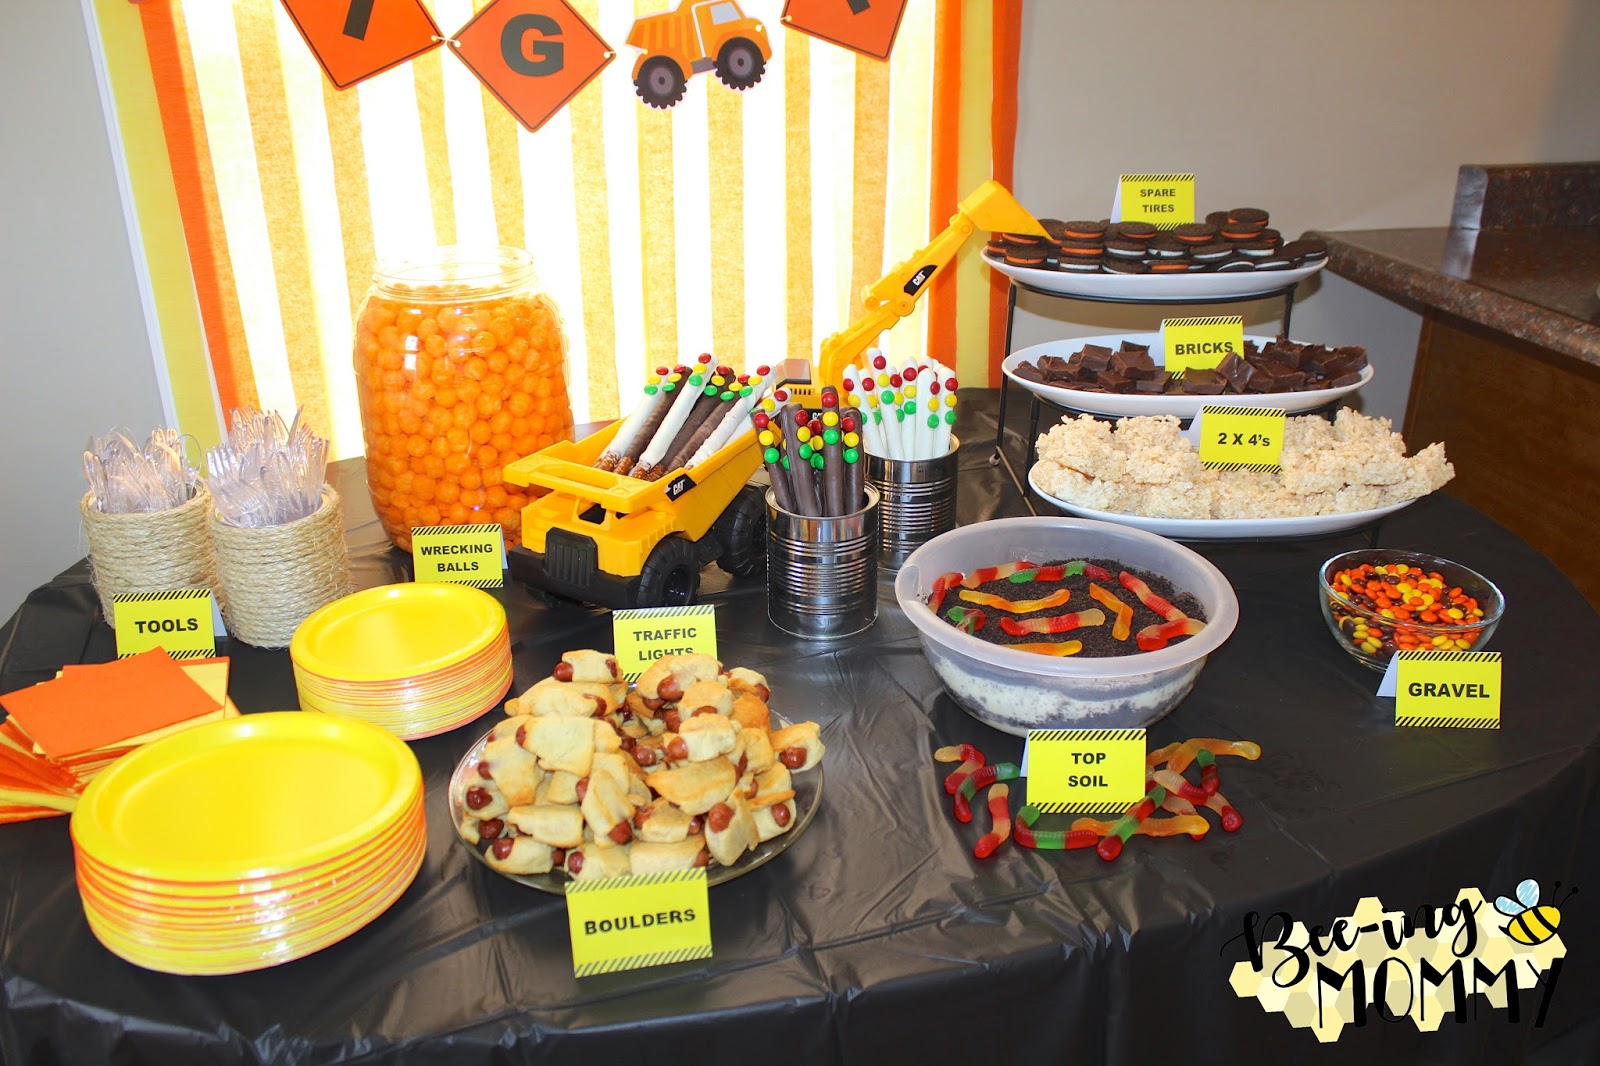 Construction Themed Party Food